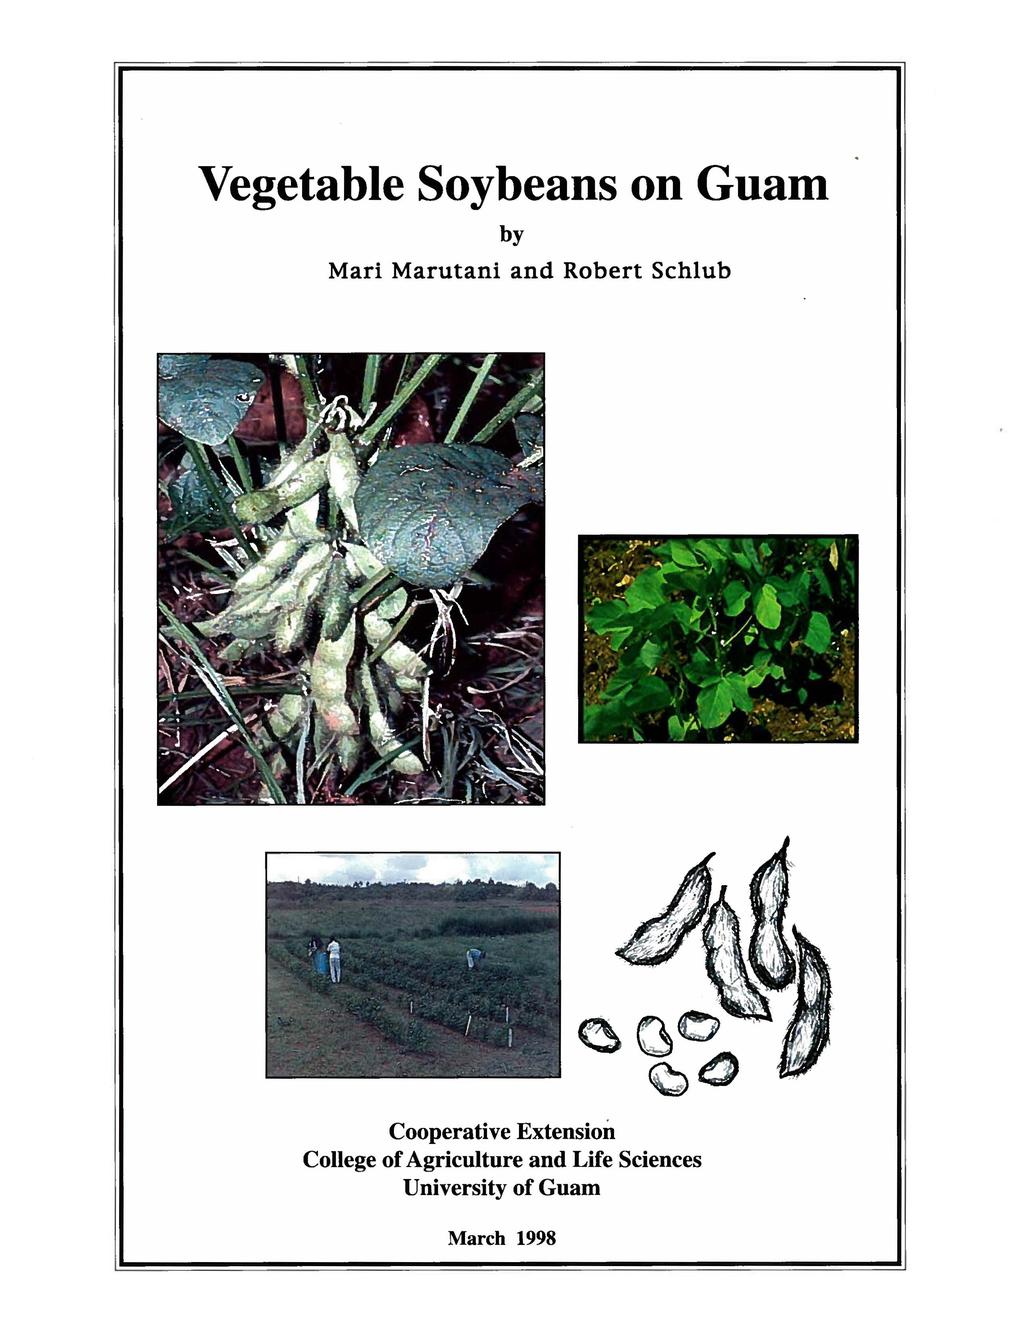 Vegetable Soybeans on Gua01 by Mari Marutani and Robert Schlub Cooperative